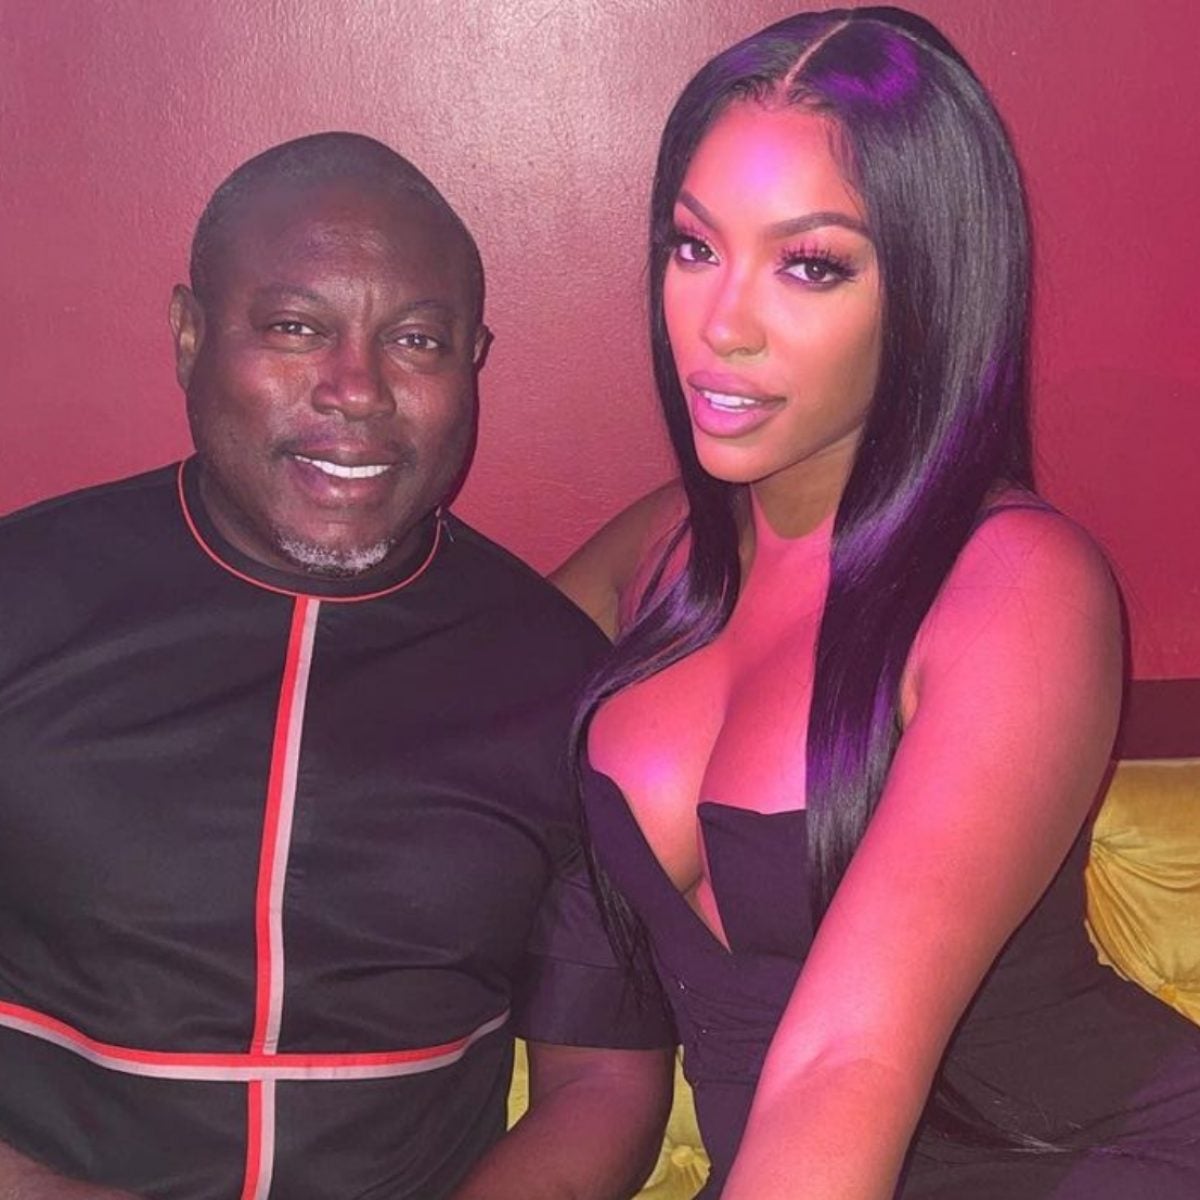 Porsha Williams And Simon Guobadia Have Three Weddings On The Way "And A Funeral For The Haters"